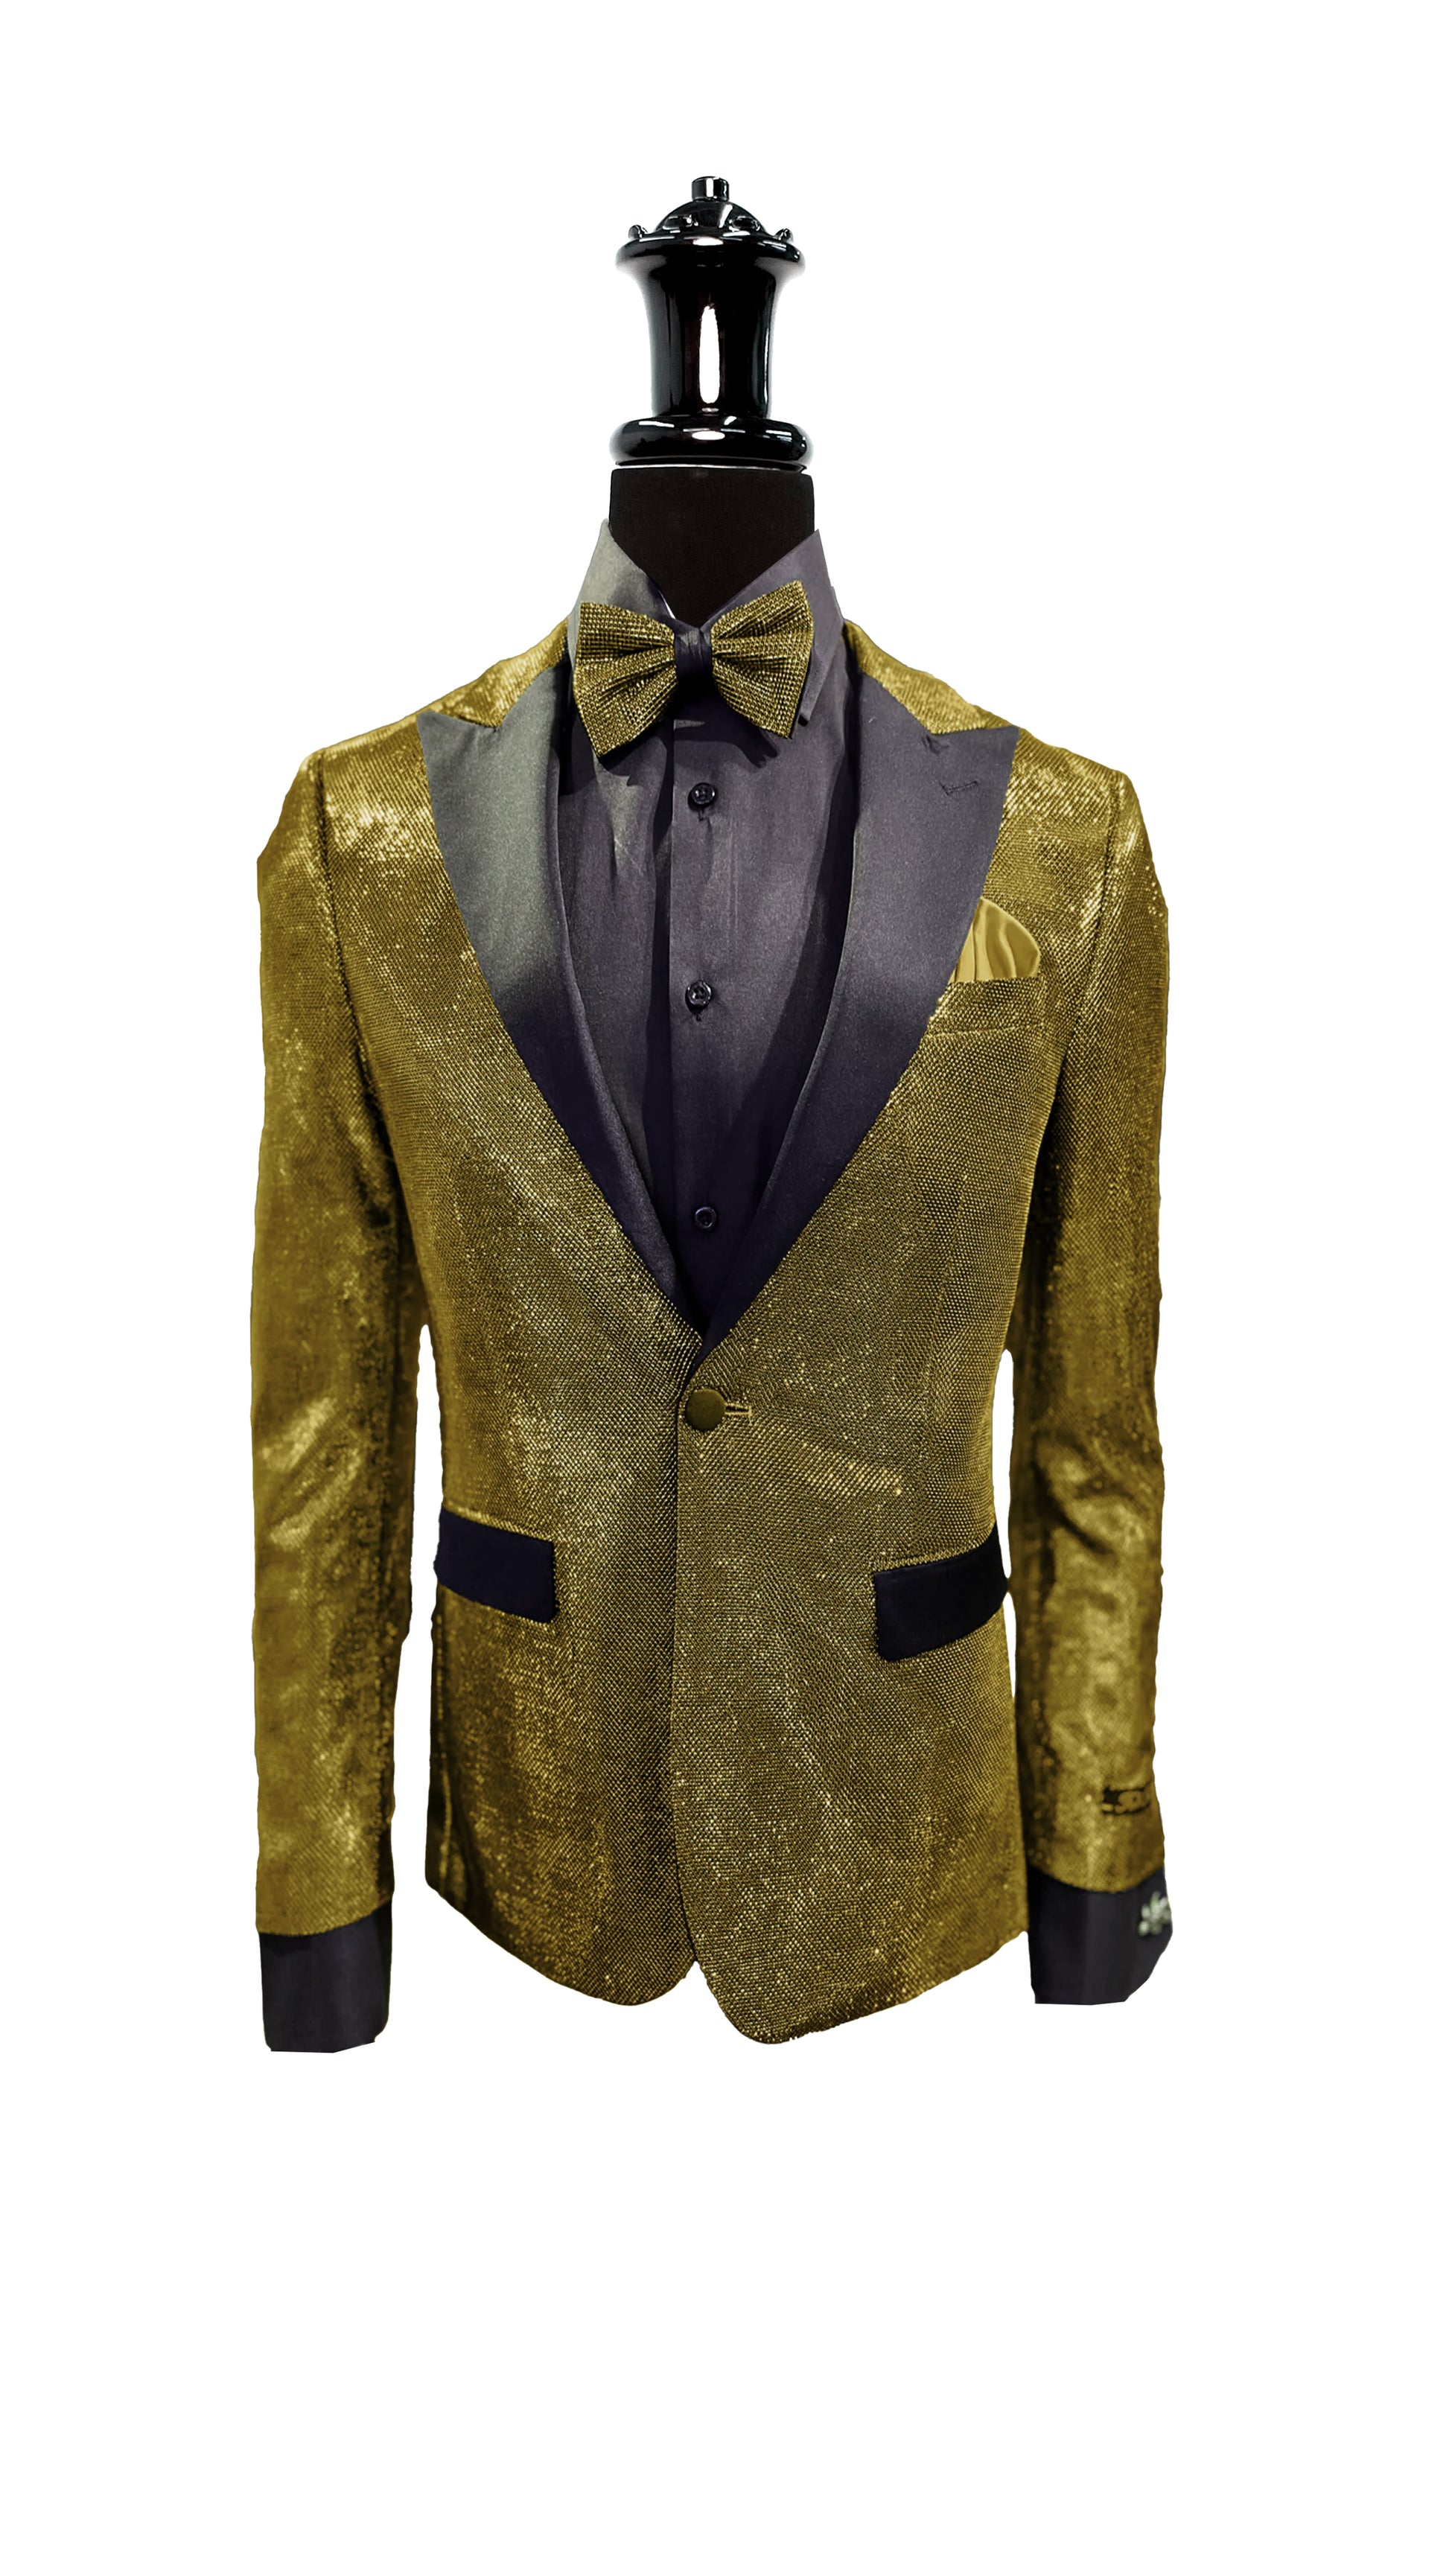 Dazzling Gold Suit by Vercini SUITS All Suits Vercini